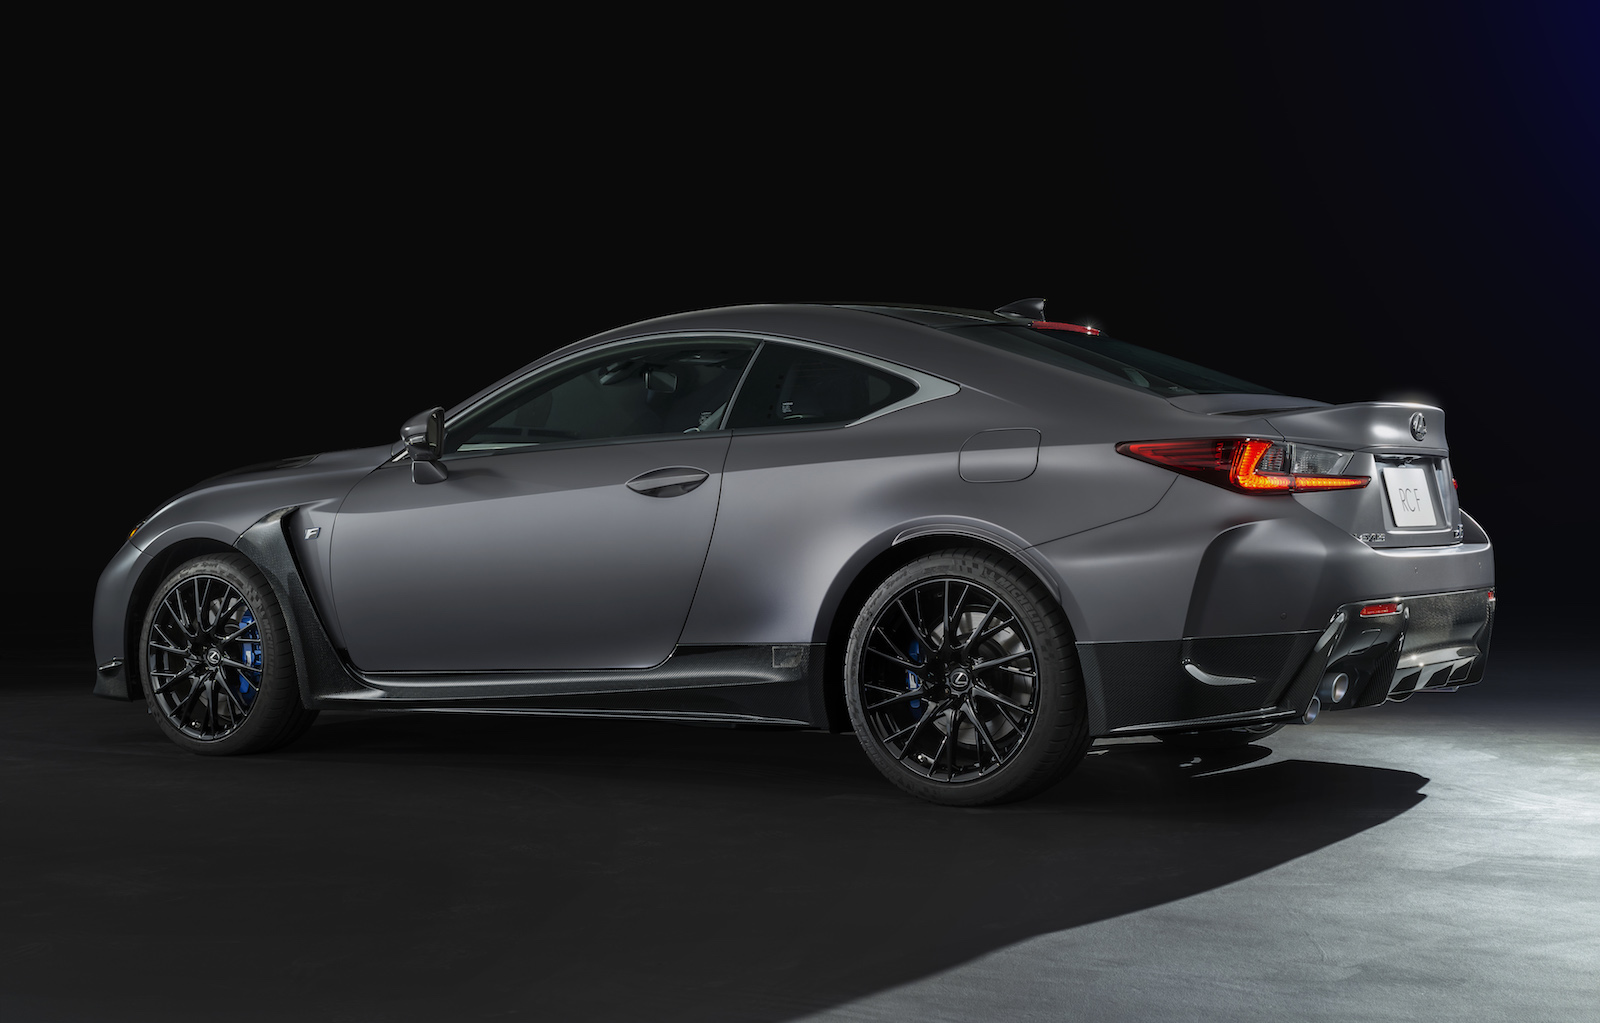 Lexus RC F & GS F matte grey special editions coming to Australia in 2018